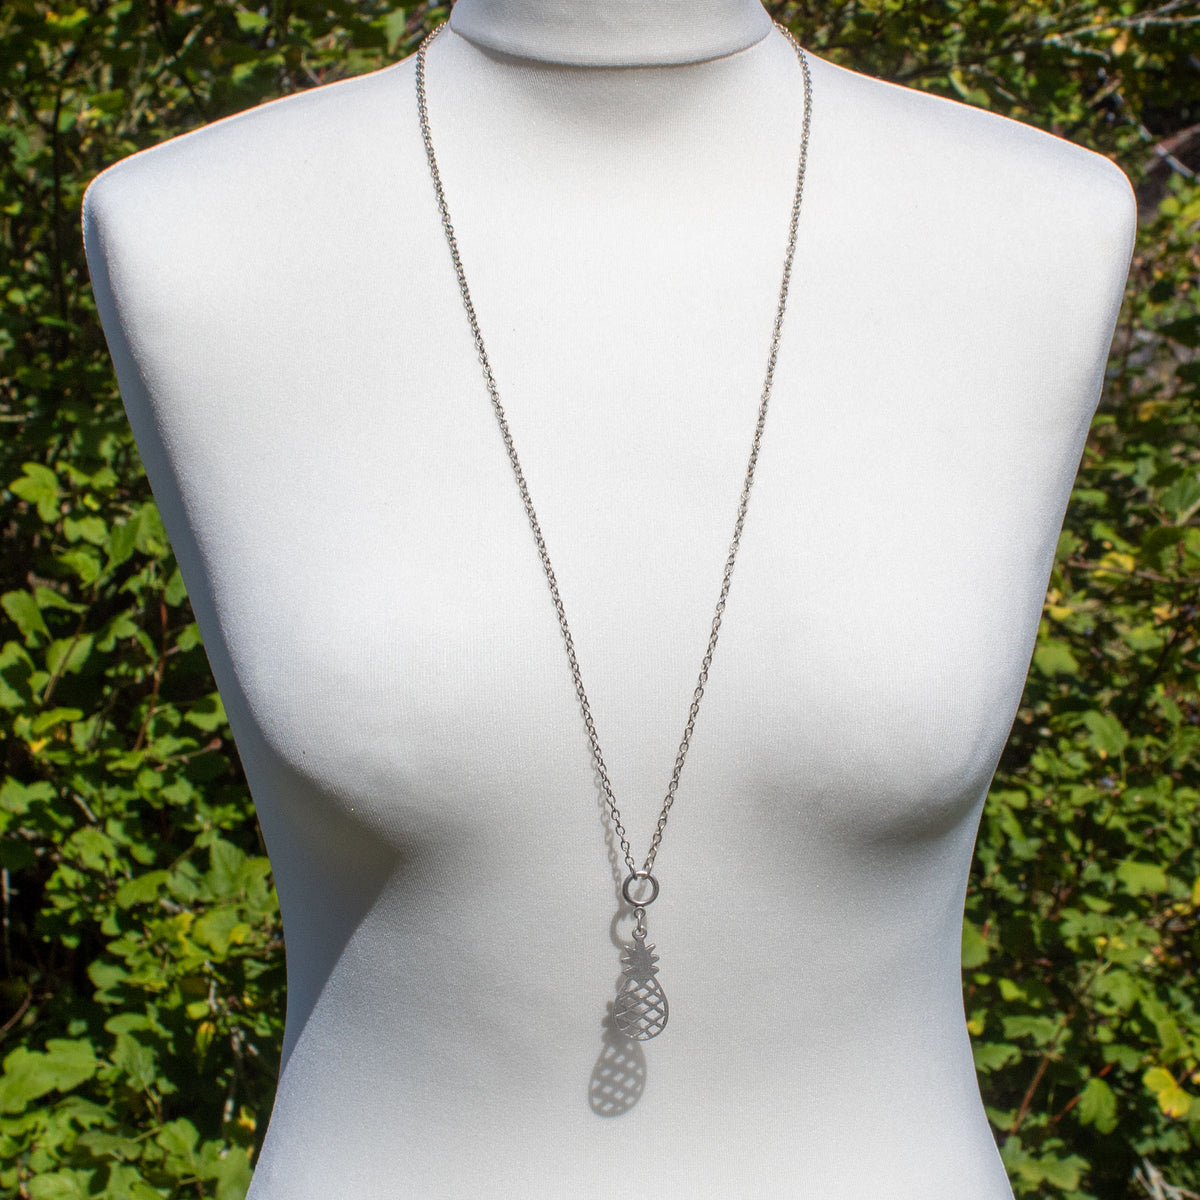 Pineapple Necklace | Necklace - The Naughty Shrew